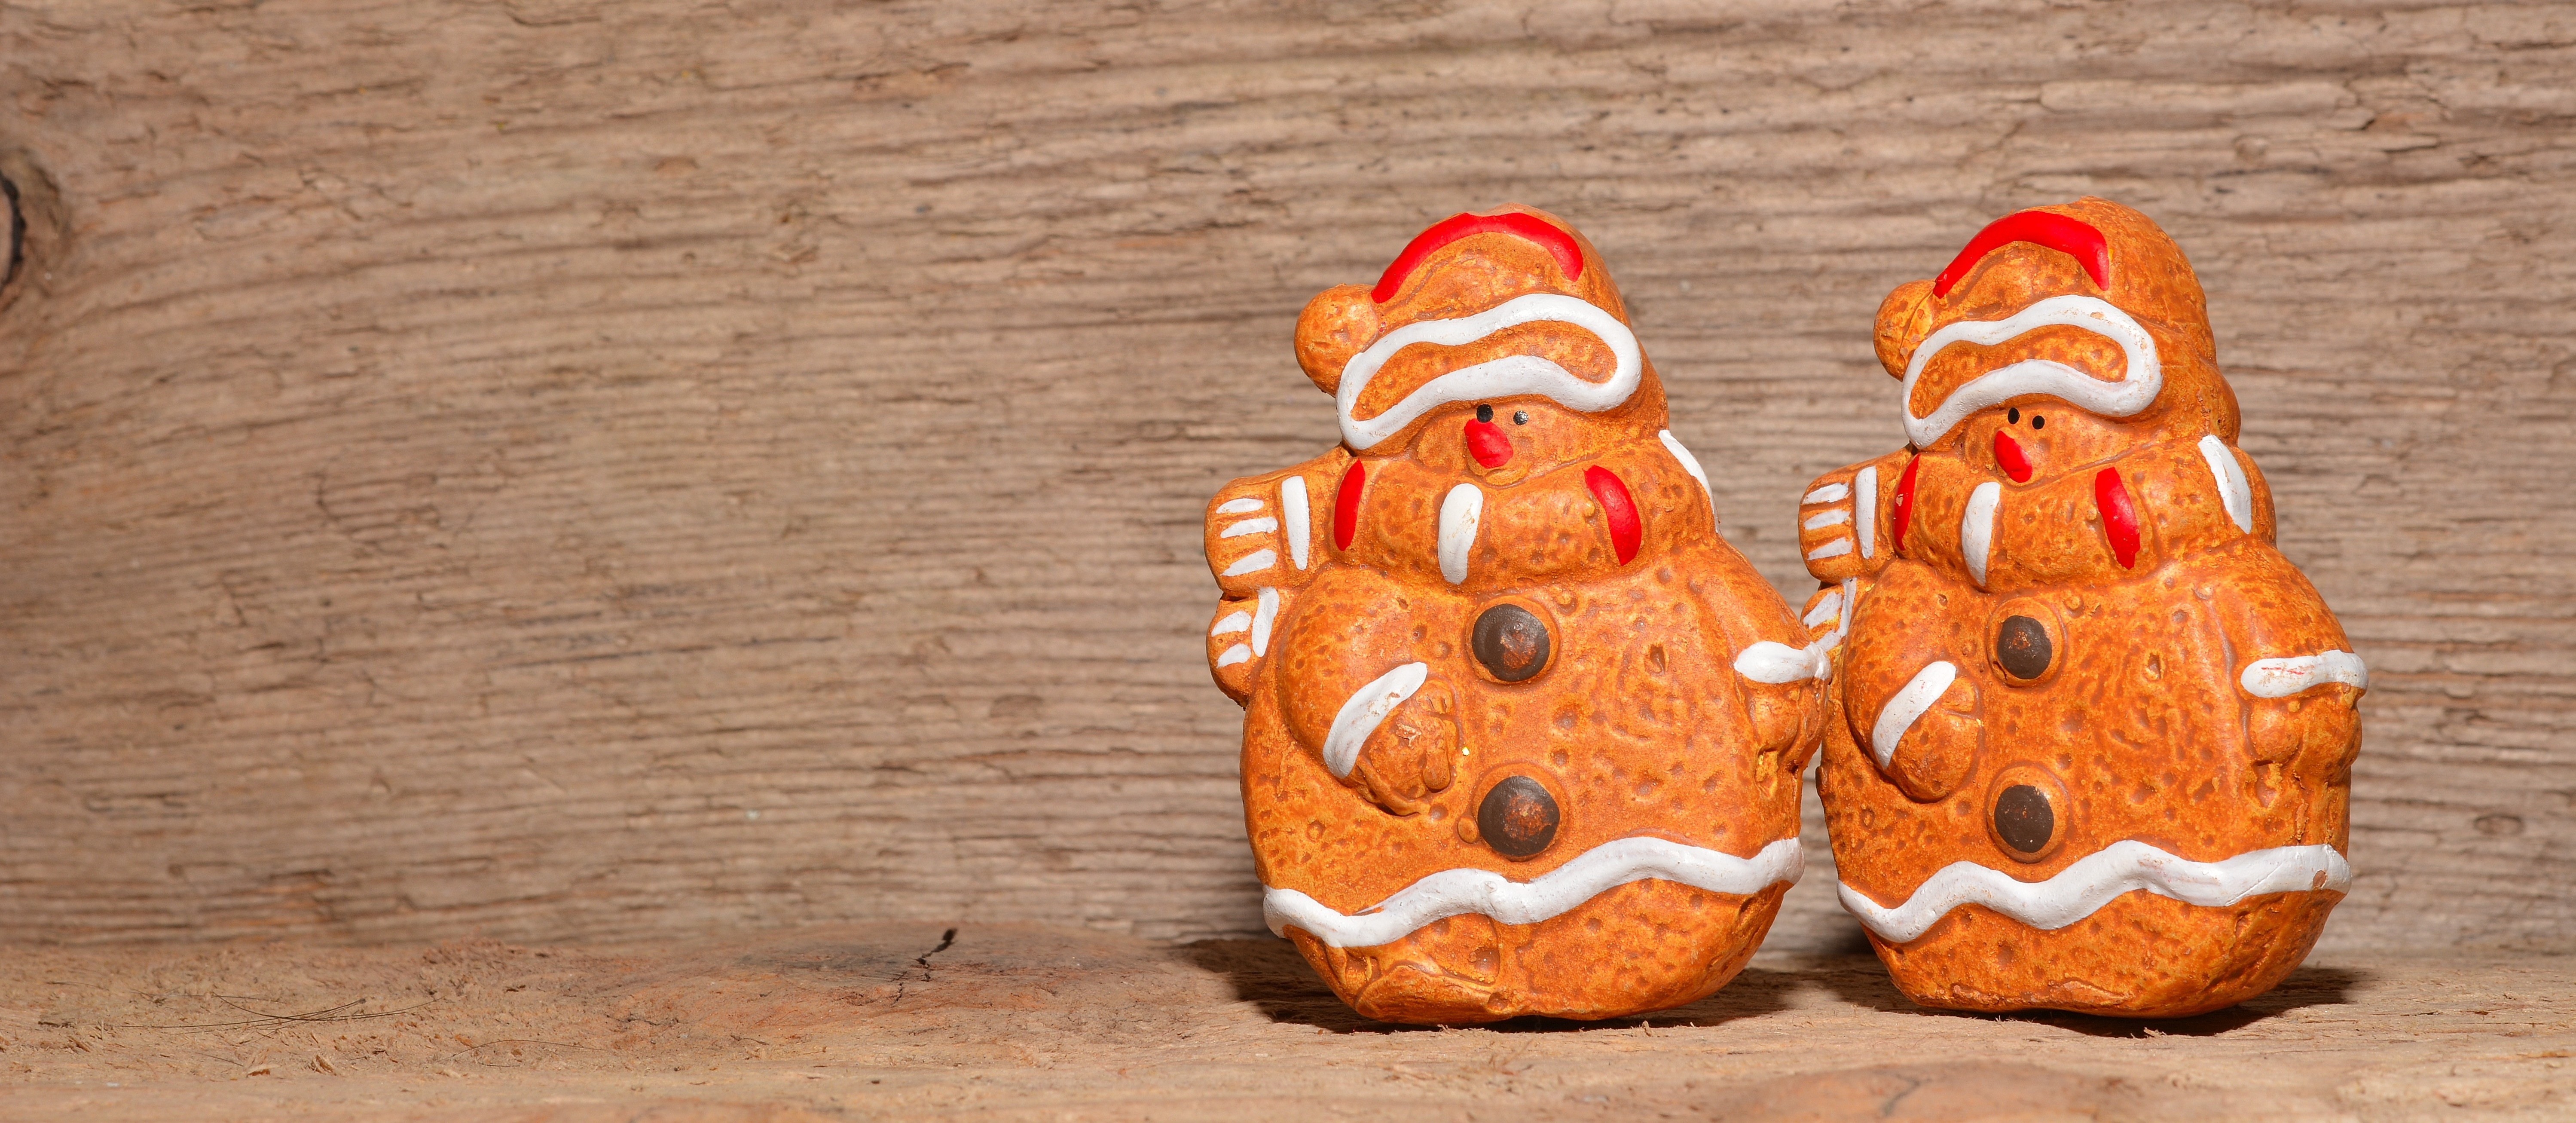 brow and white gingerbread figurines